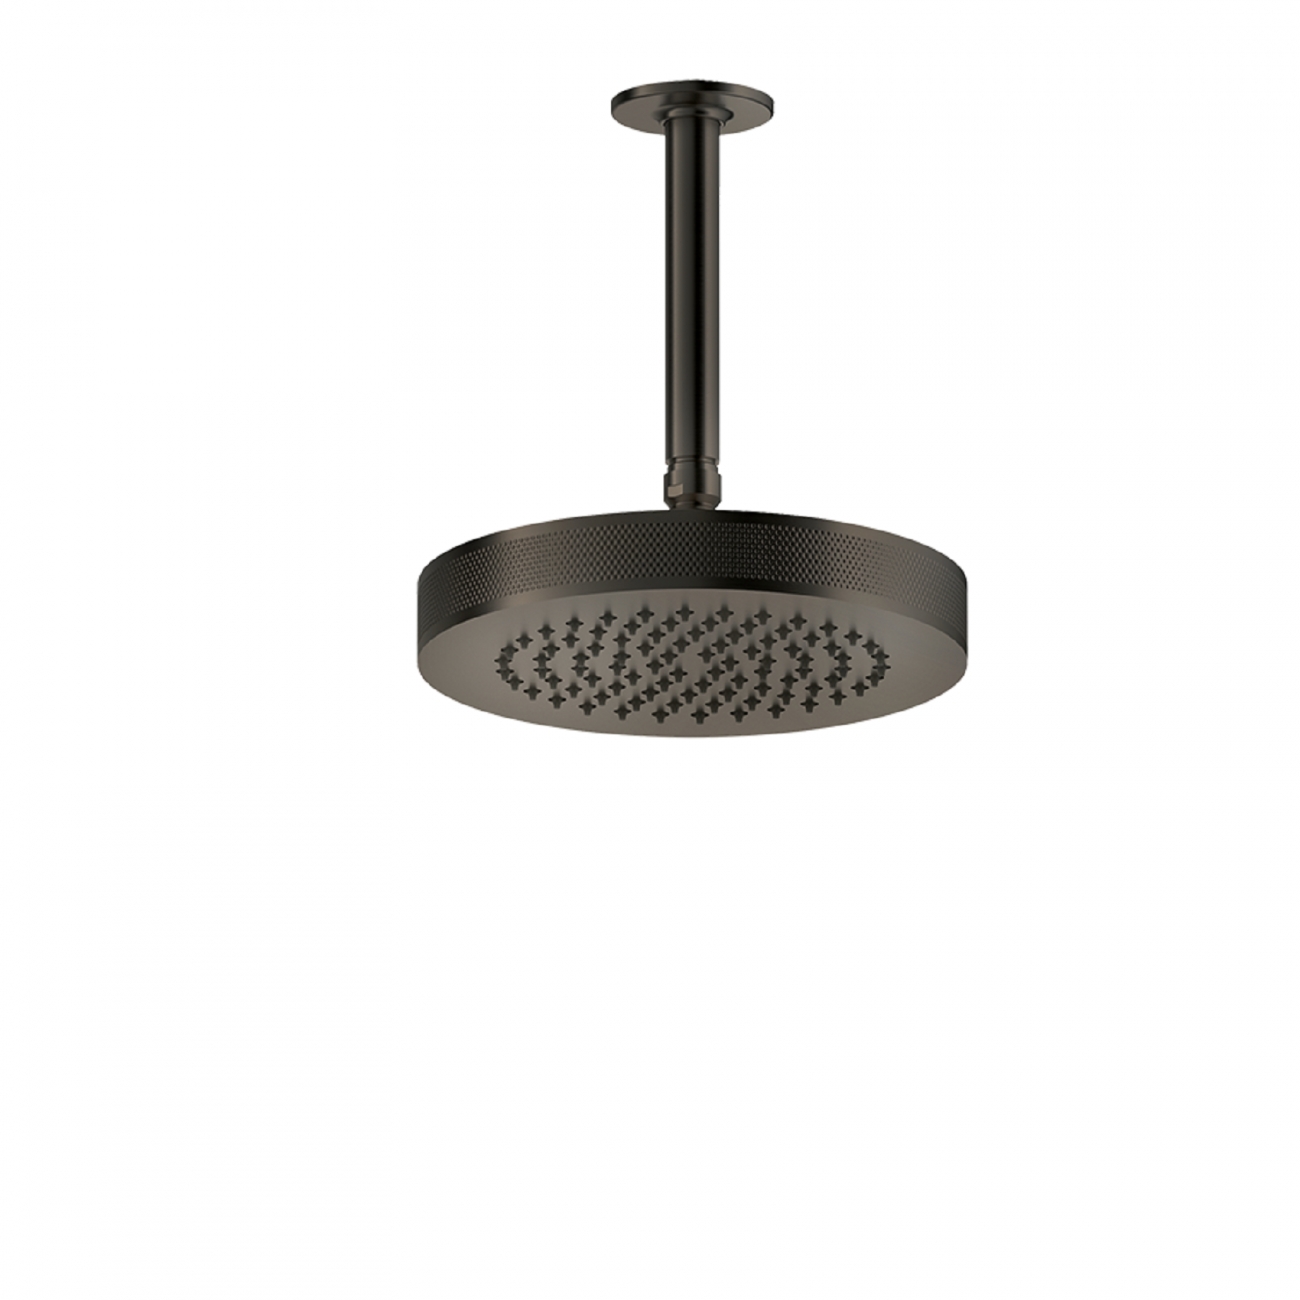 GESSI INCISO CEILING MOUNTED SHOWER HEAD